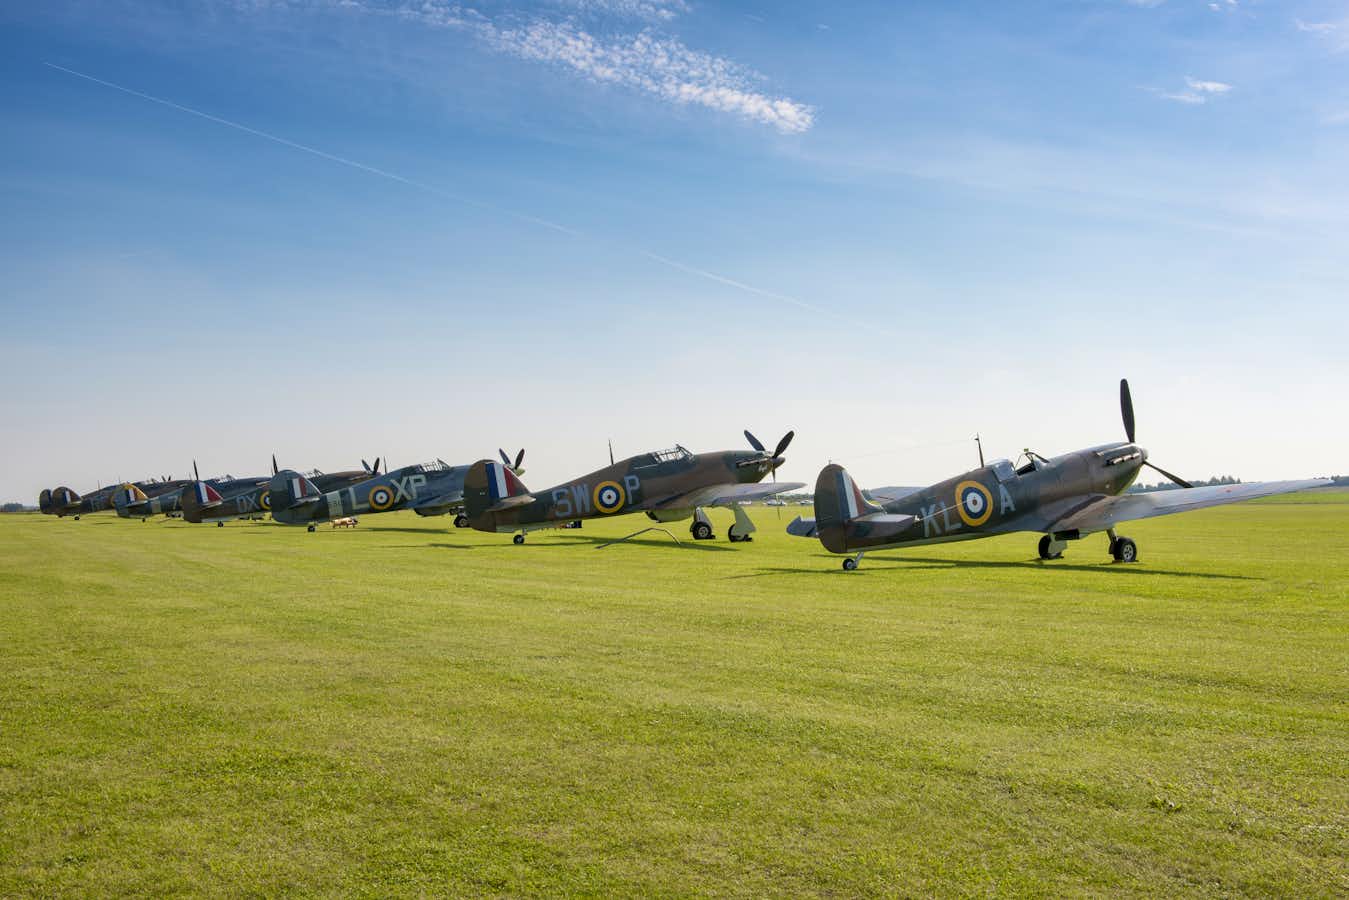 Our Finest Hour: The Battle of Britain